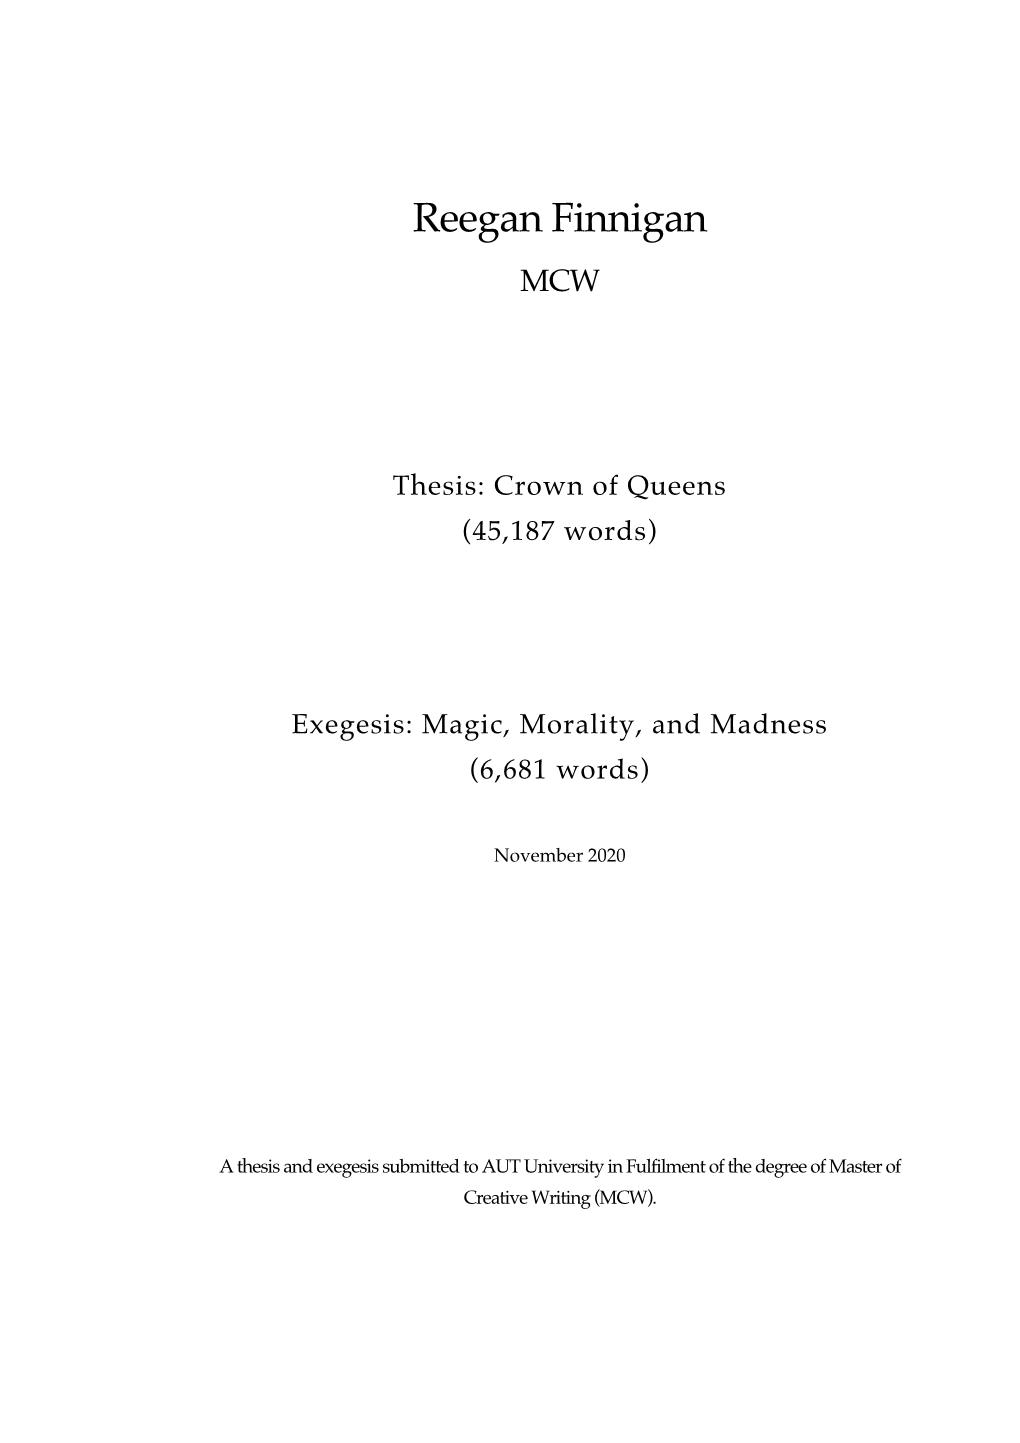 Exegesis: Magic, Morality, and Madness (6,681 Words)